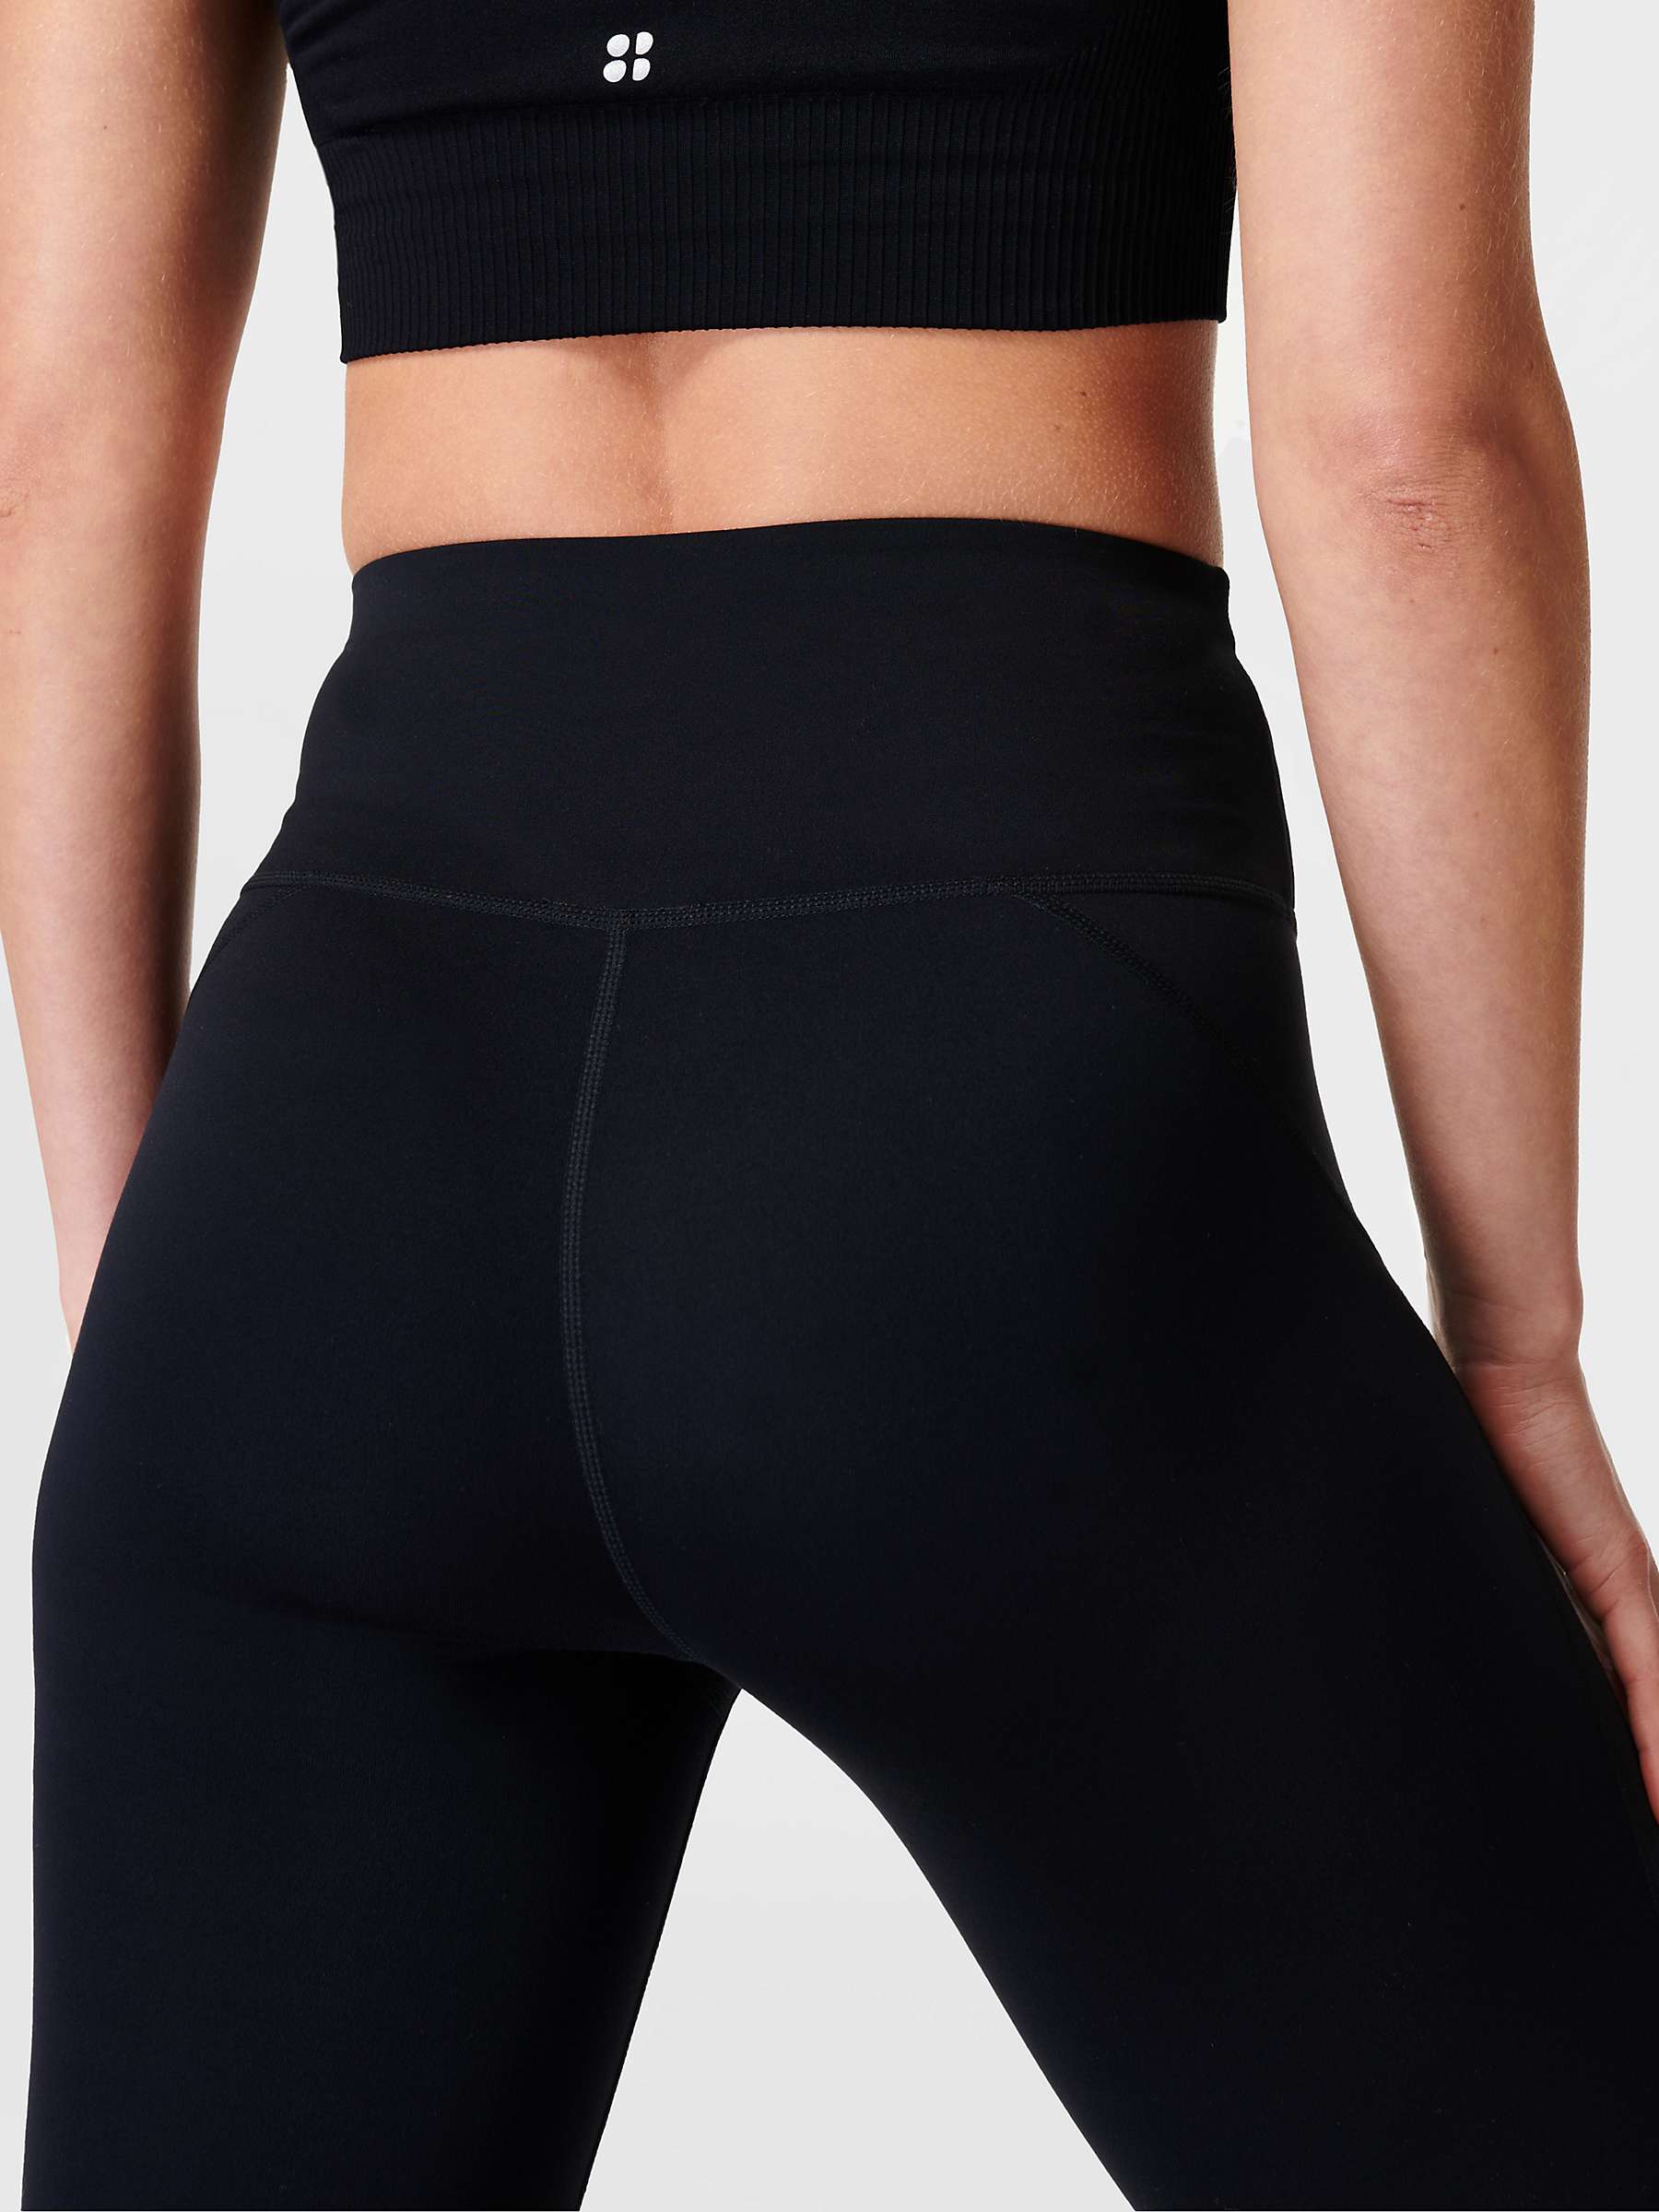 Buy Sweaty Betty All Day Gym Leggings Online at johnlewis.com